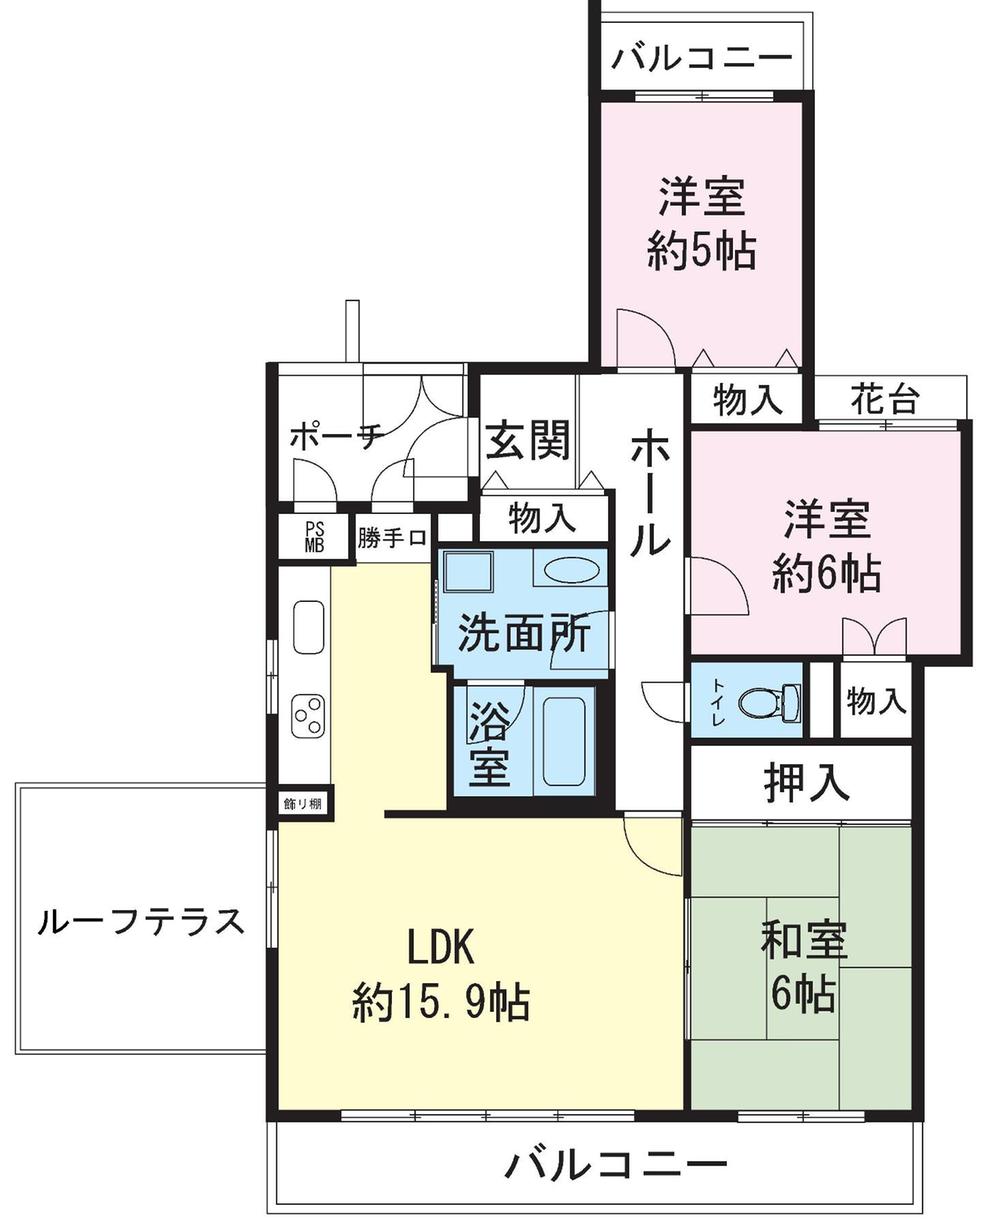 Floor plan. 3LDK, Price 18.3 million yen, Occupied area 80.55 sq m , Balcony area 9.72 sq m roof terrace about 8.1 sq m with